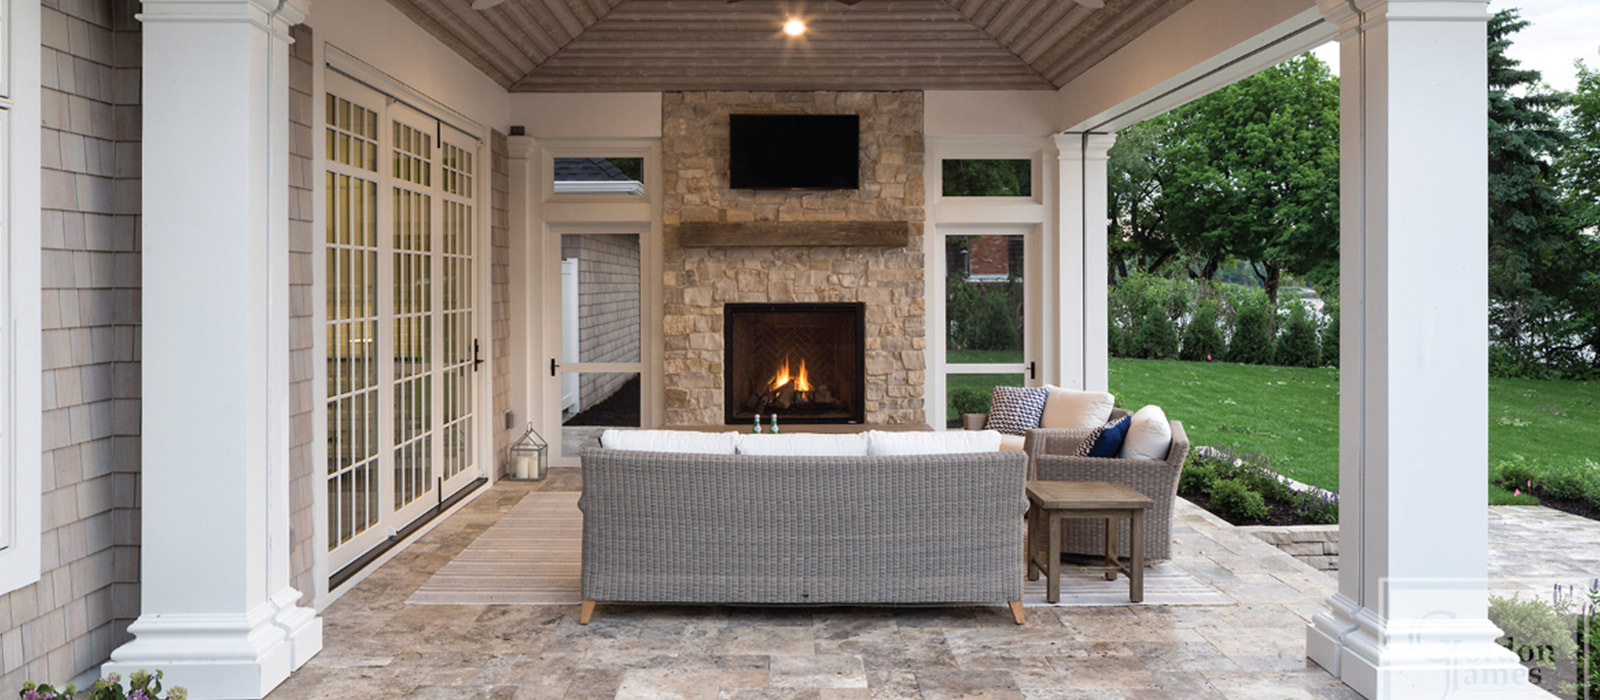 Outdoor Living Room With Fireplace & TV